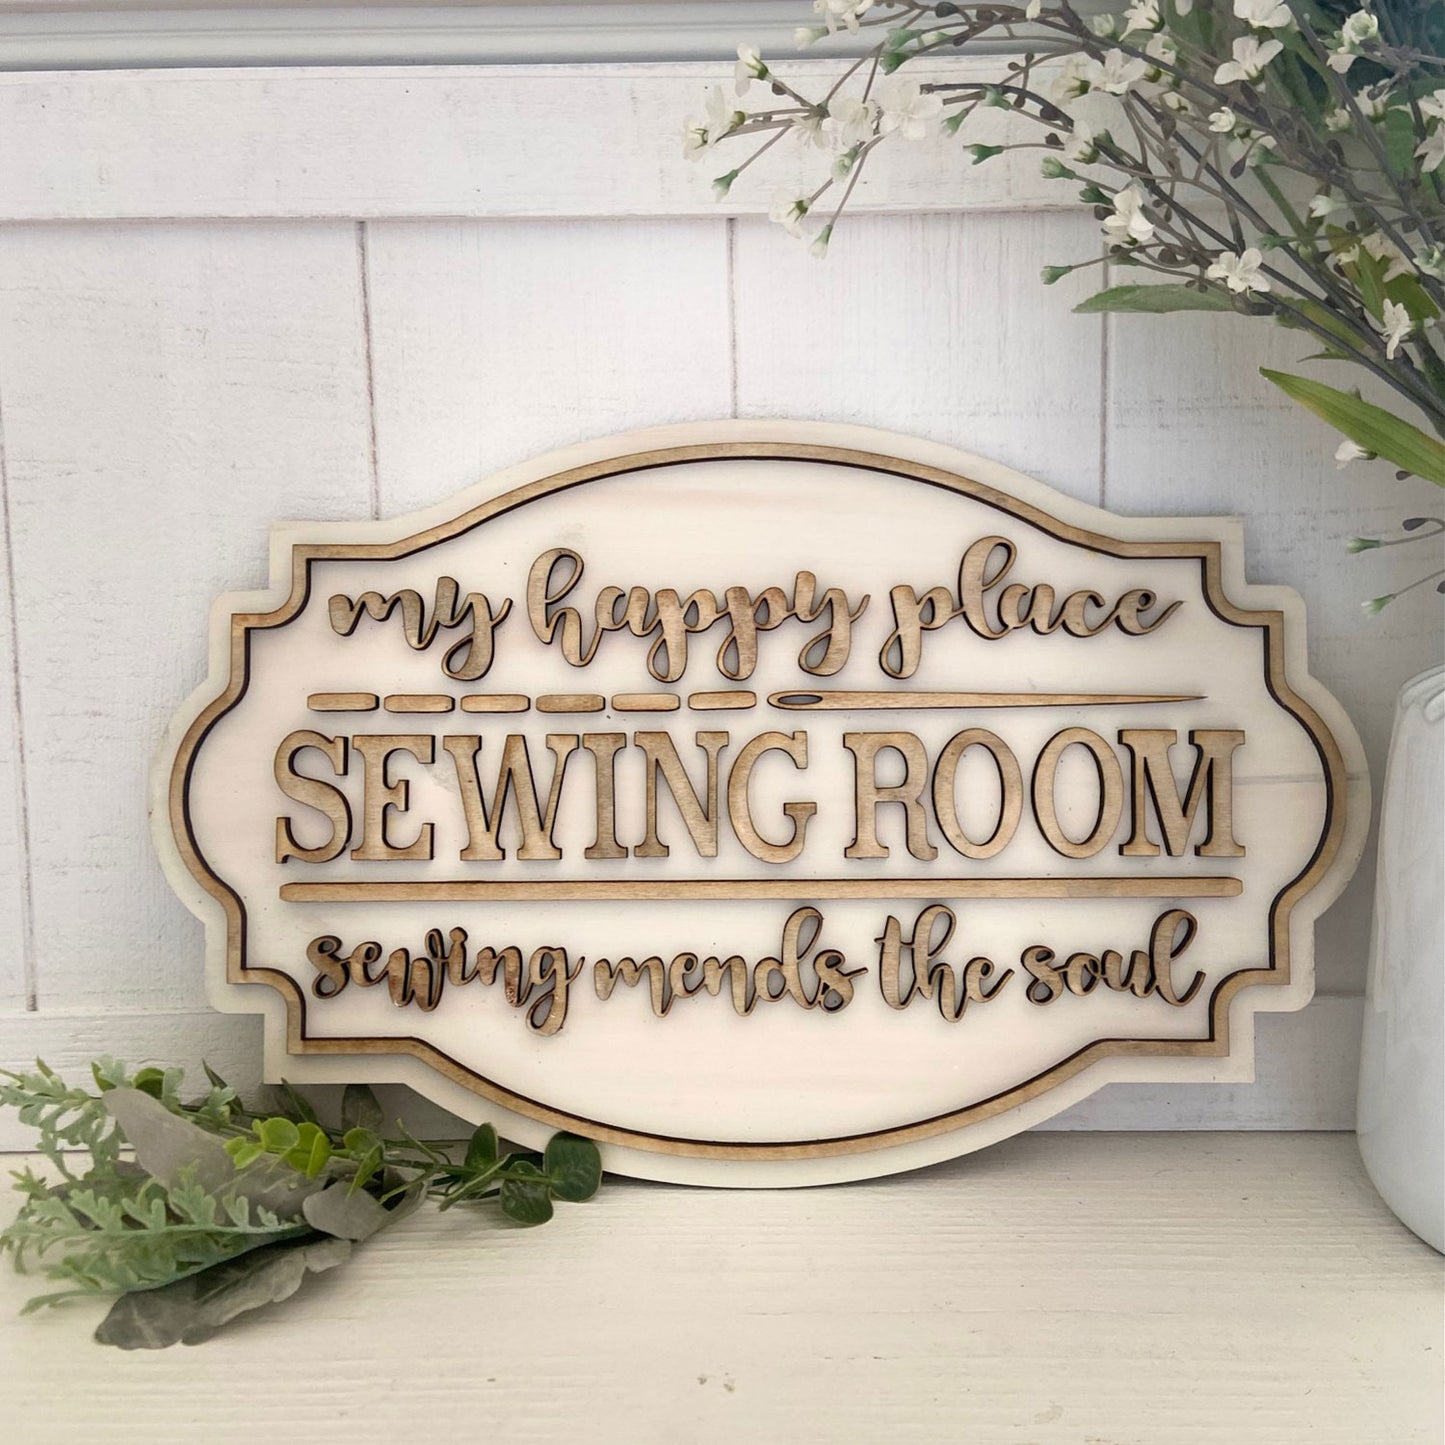 Sewing Room Door Sign "Sewing Mends the Soul"